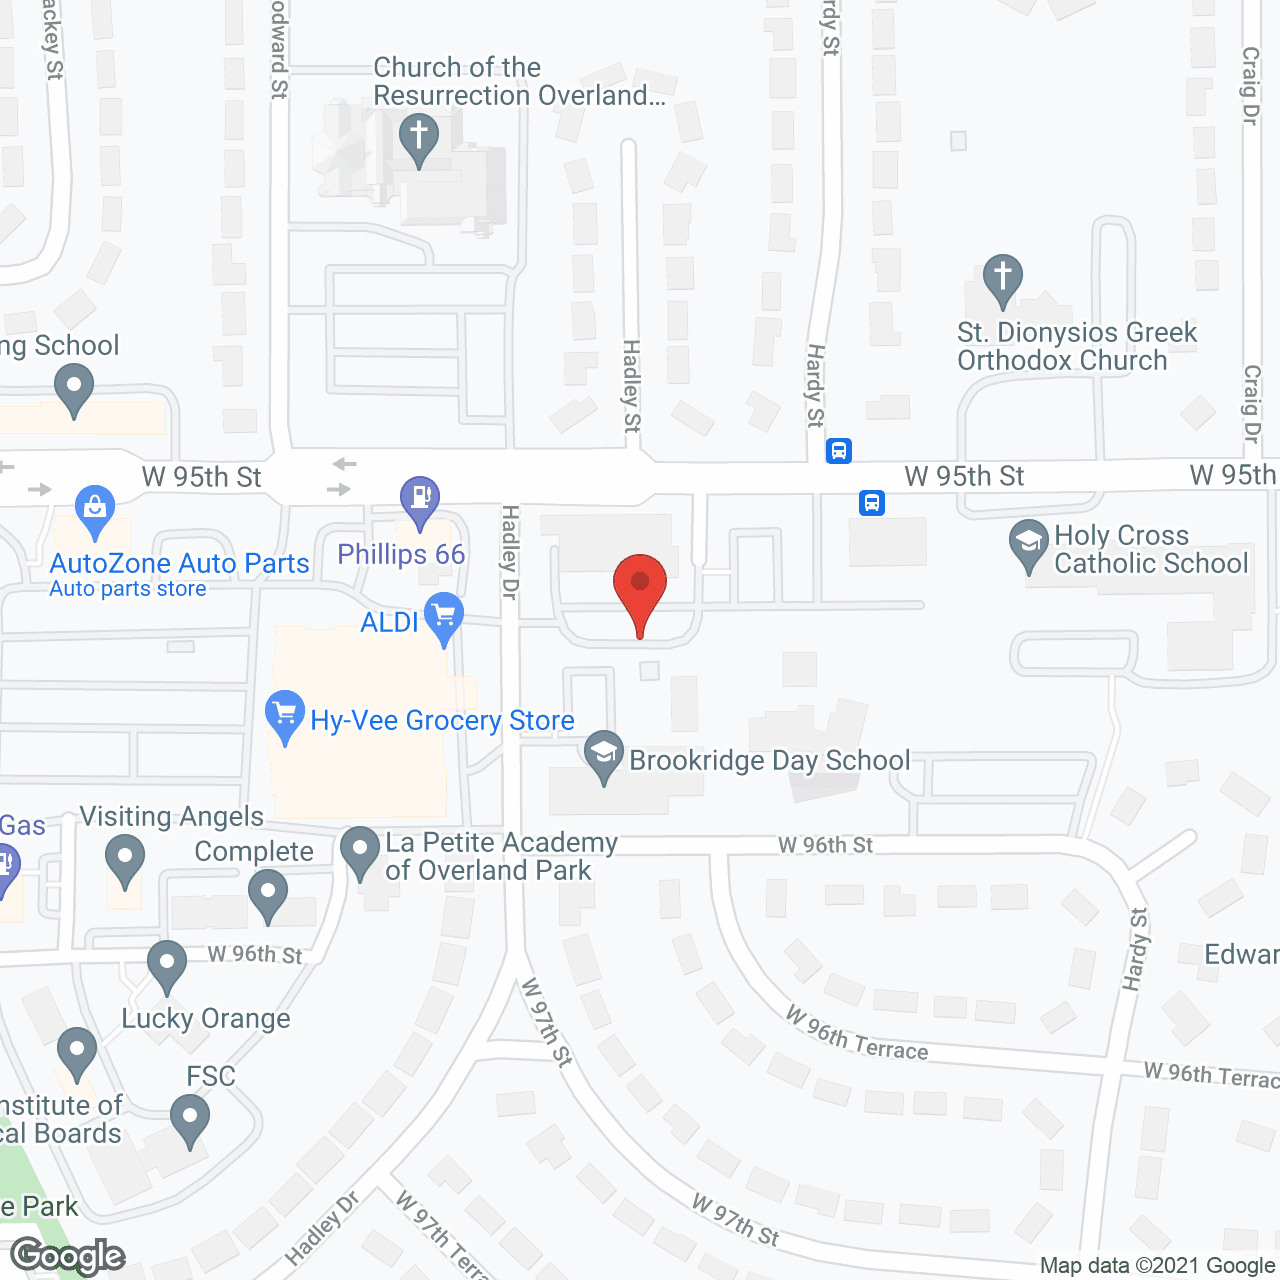 Home Sweet Home Care Services Agency in google map